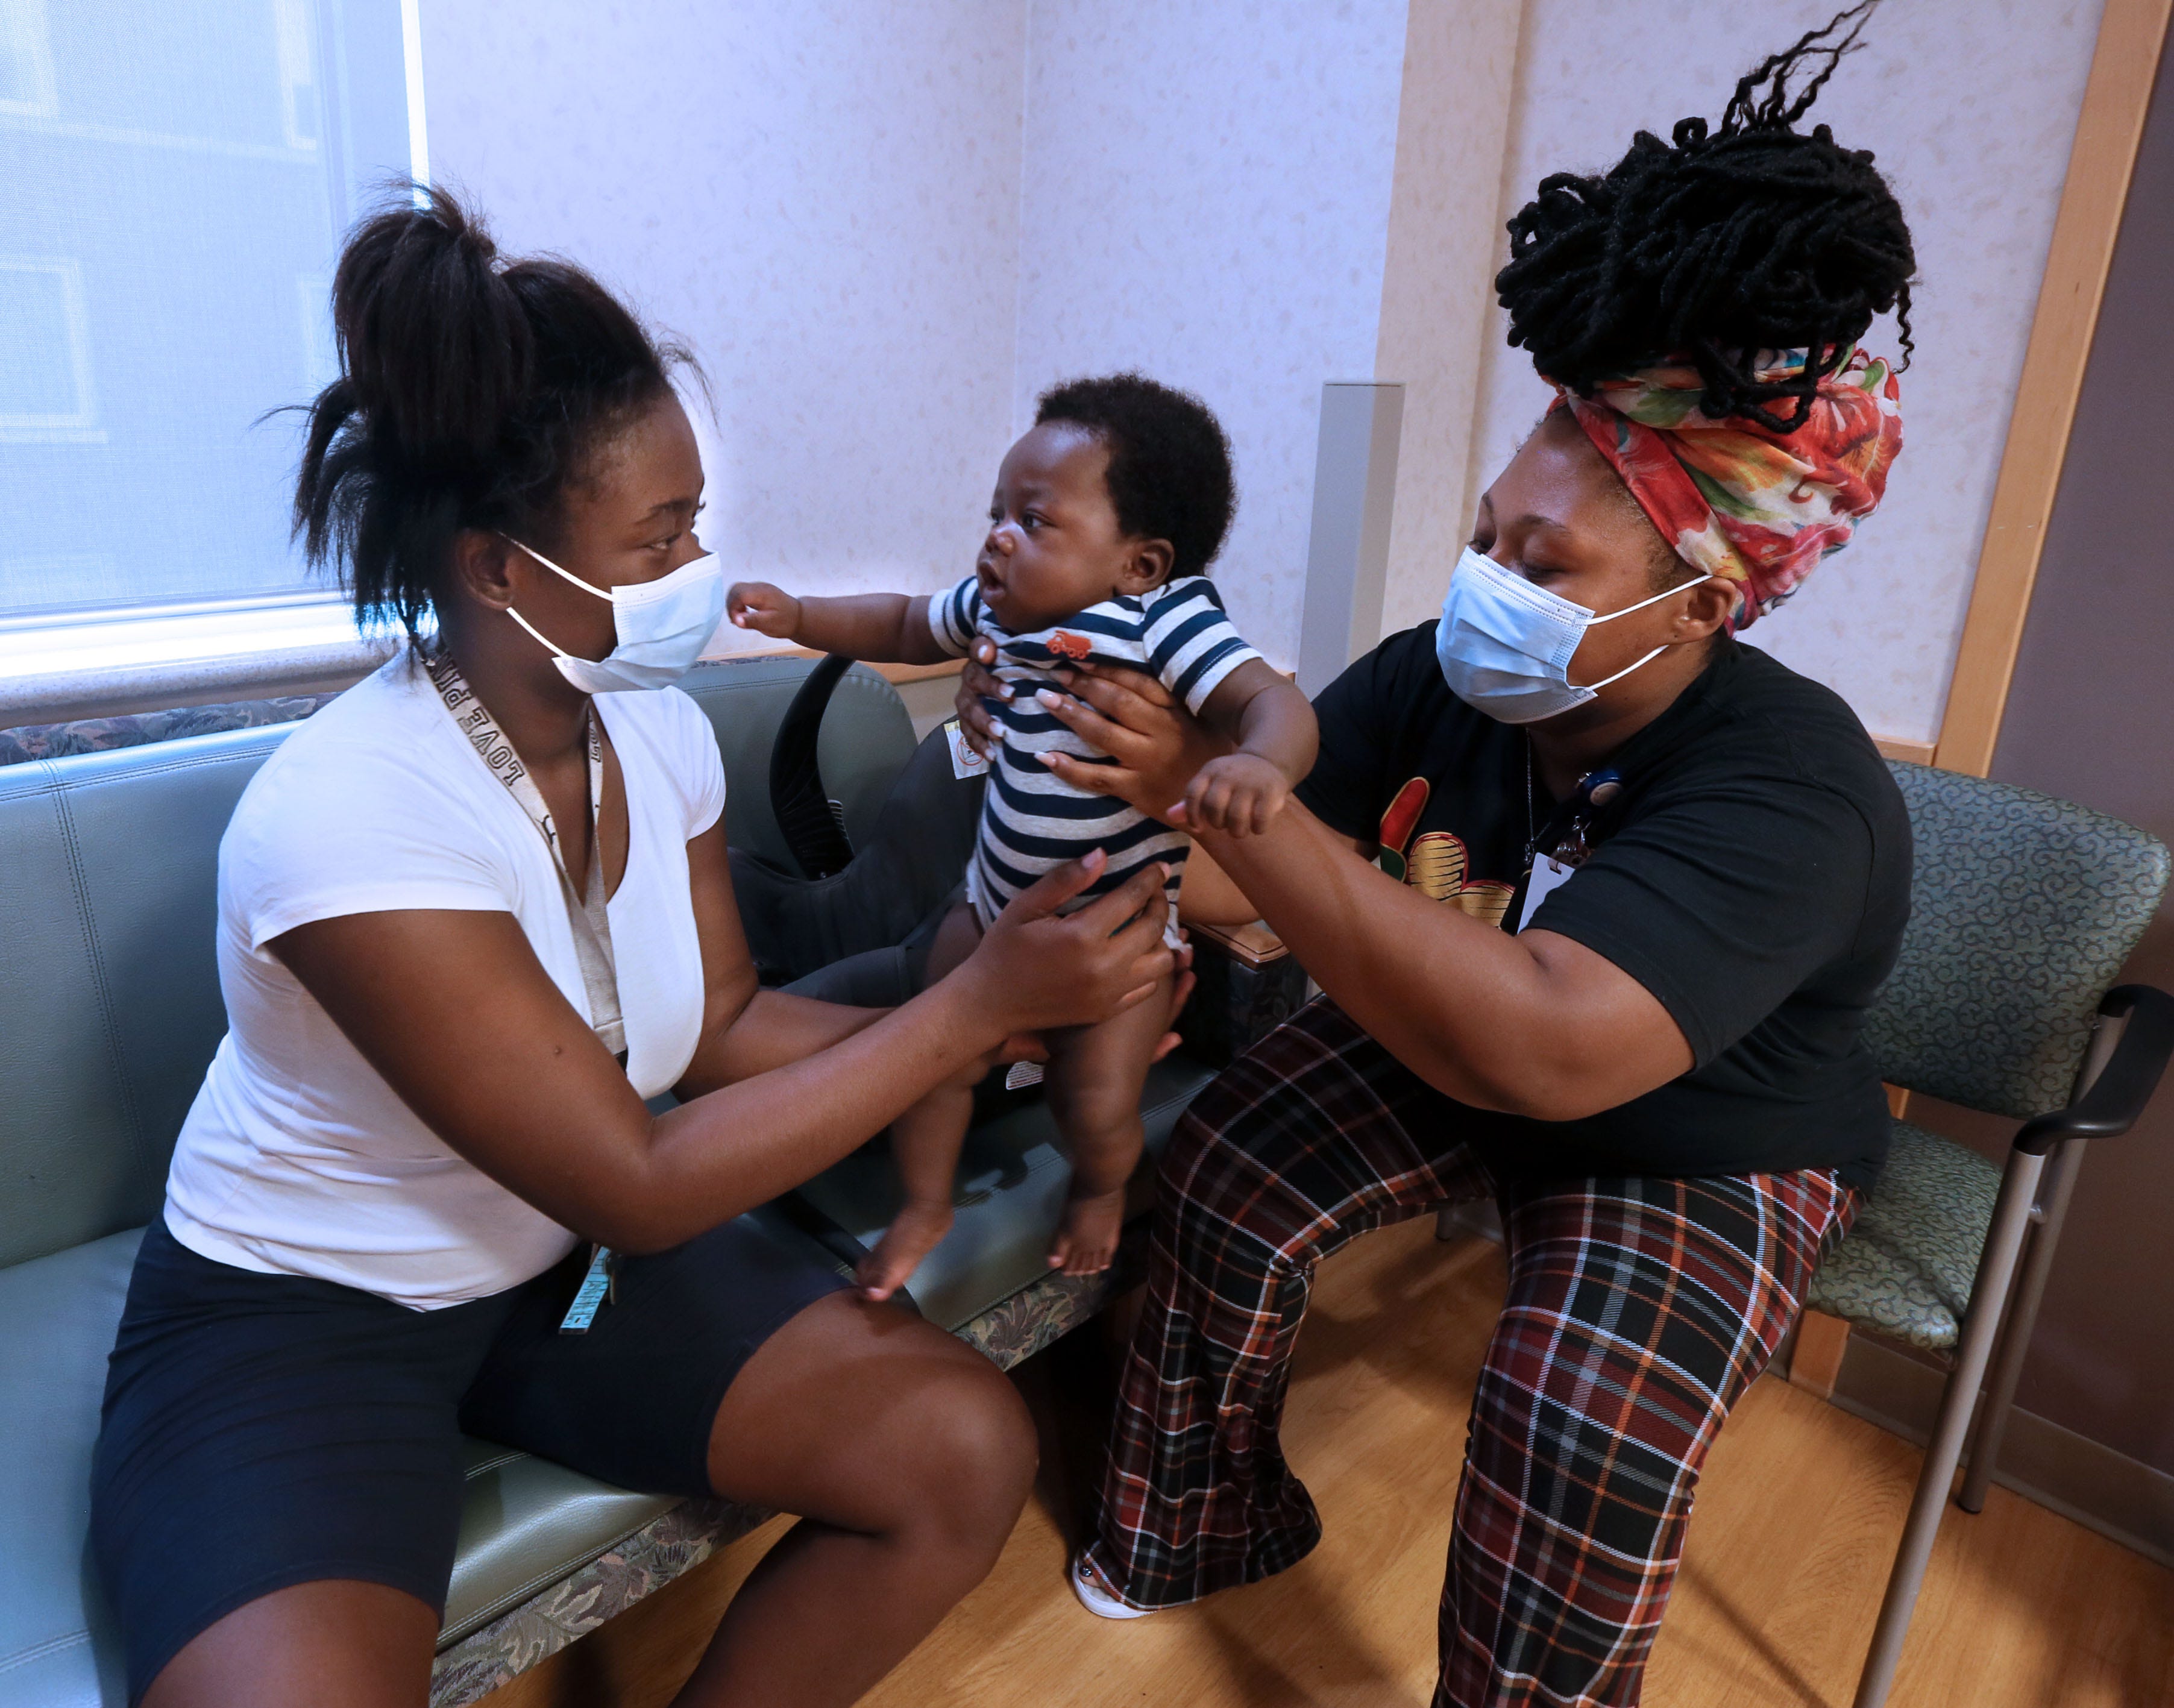 Jermesha Farmer, left, reaches for her son Veon Jackson, 5 months, from Santana Grady, a community health worker, right, while at the hospital for a regular check up on the newborn at Ascension SE Wisconsin Hospital - St. Joseph Campus in Milwaukee.